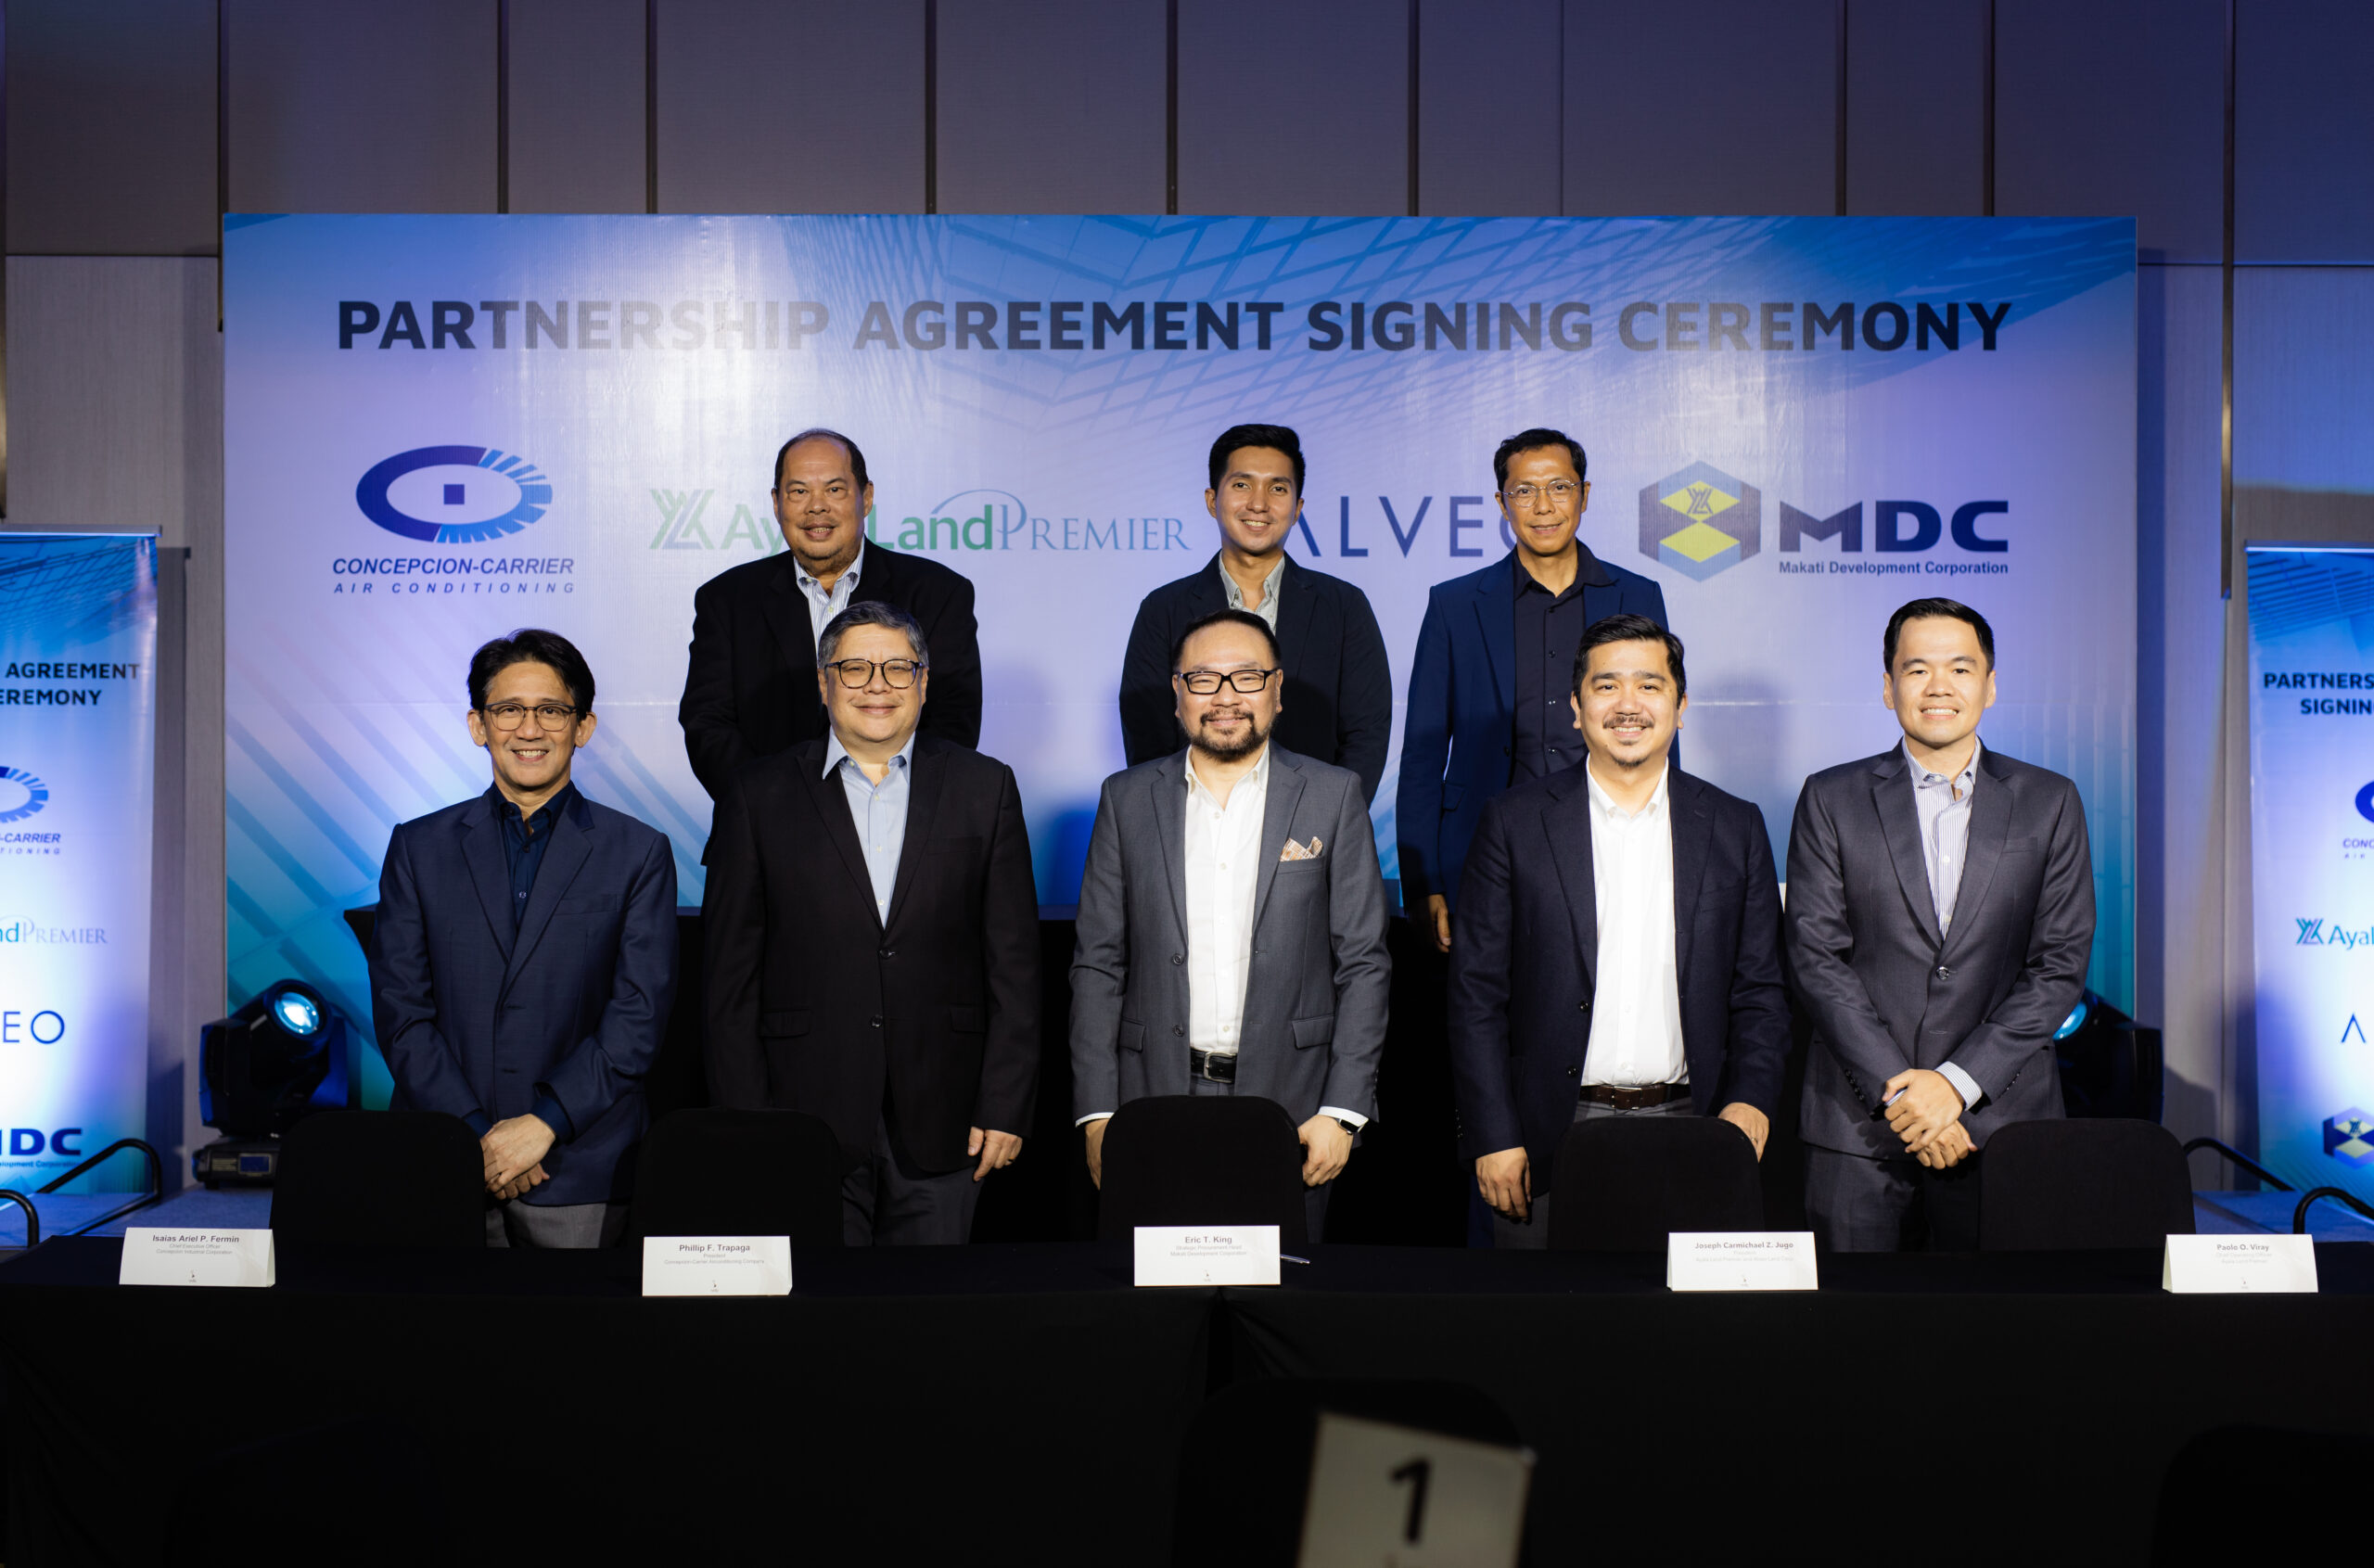 Ayala Land Premier, Alveo Land, and Makati Development Corp Strengthen Partnership with Concepcion-Carrier Air Conditioning Co.